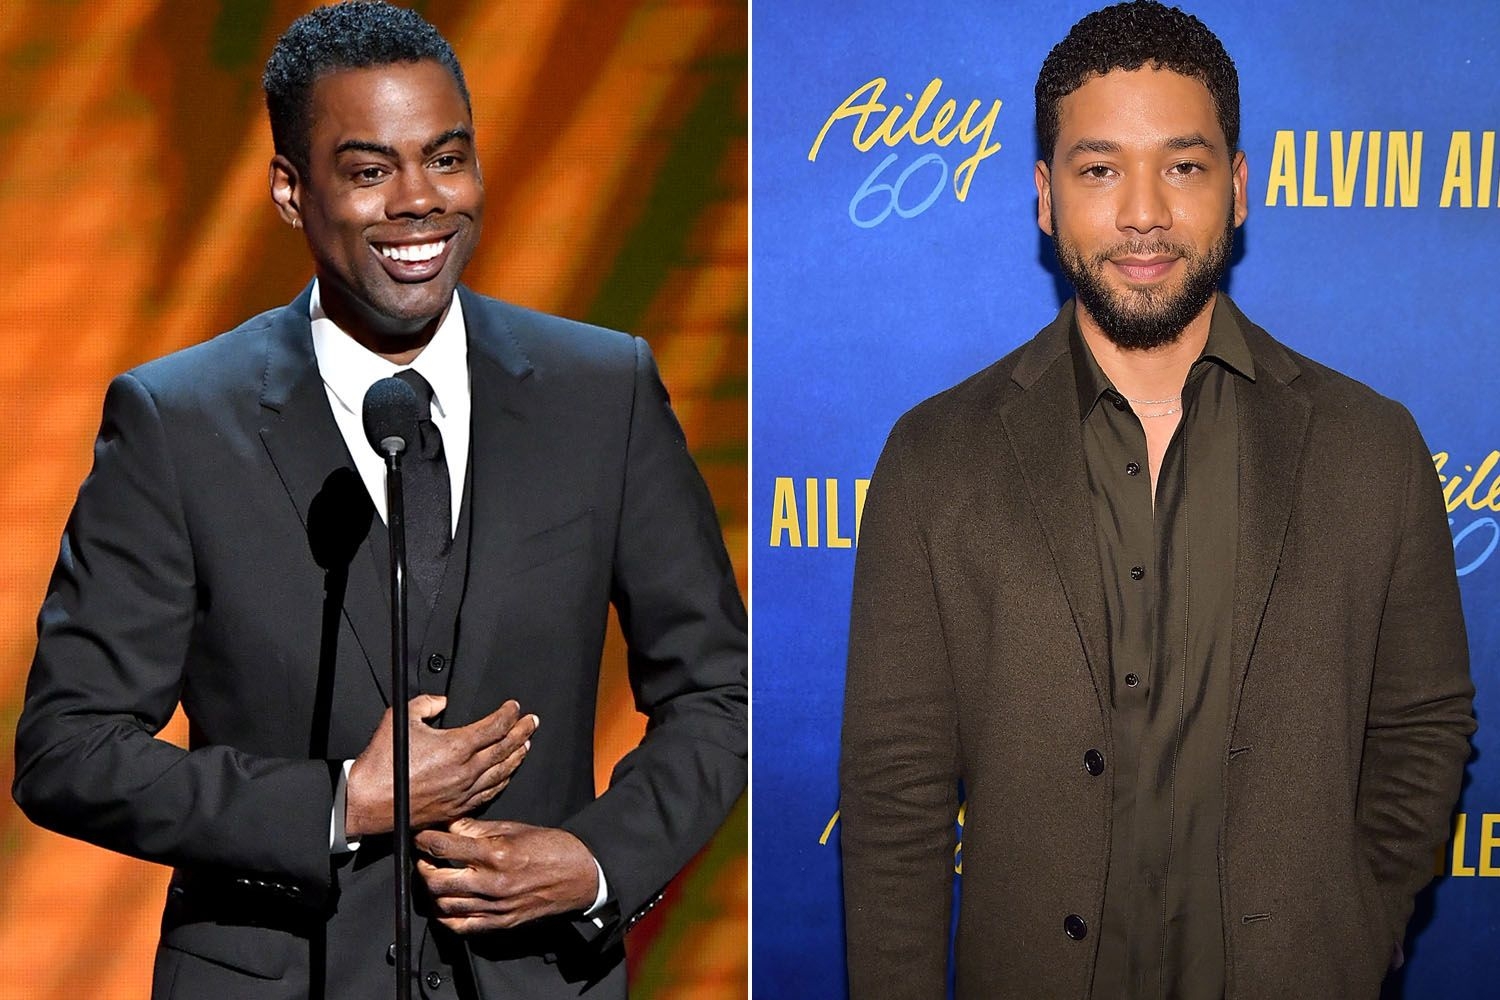 Jussie Smollett skips NAACP Awards, Chris Rock takes aim: ‘What the hell was he thinking?’